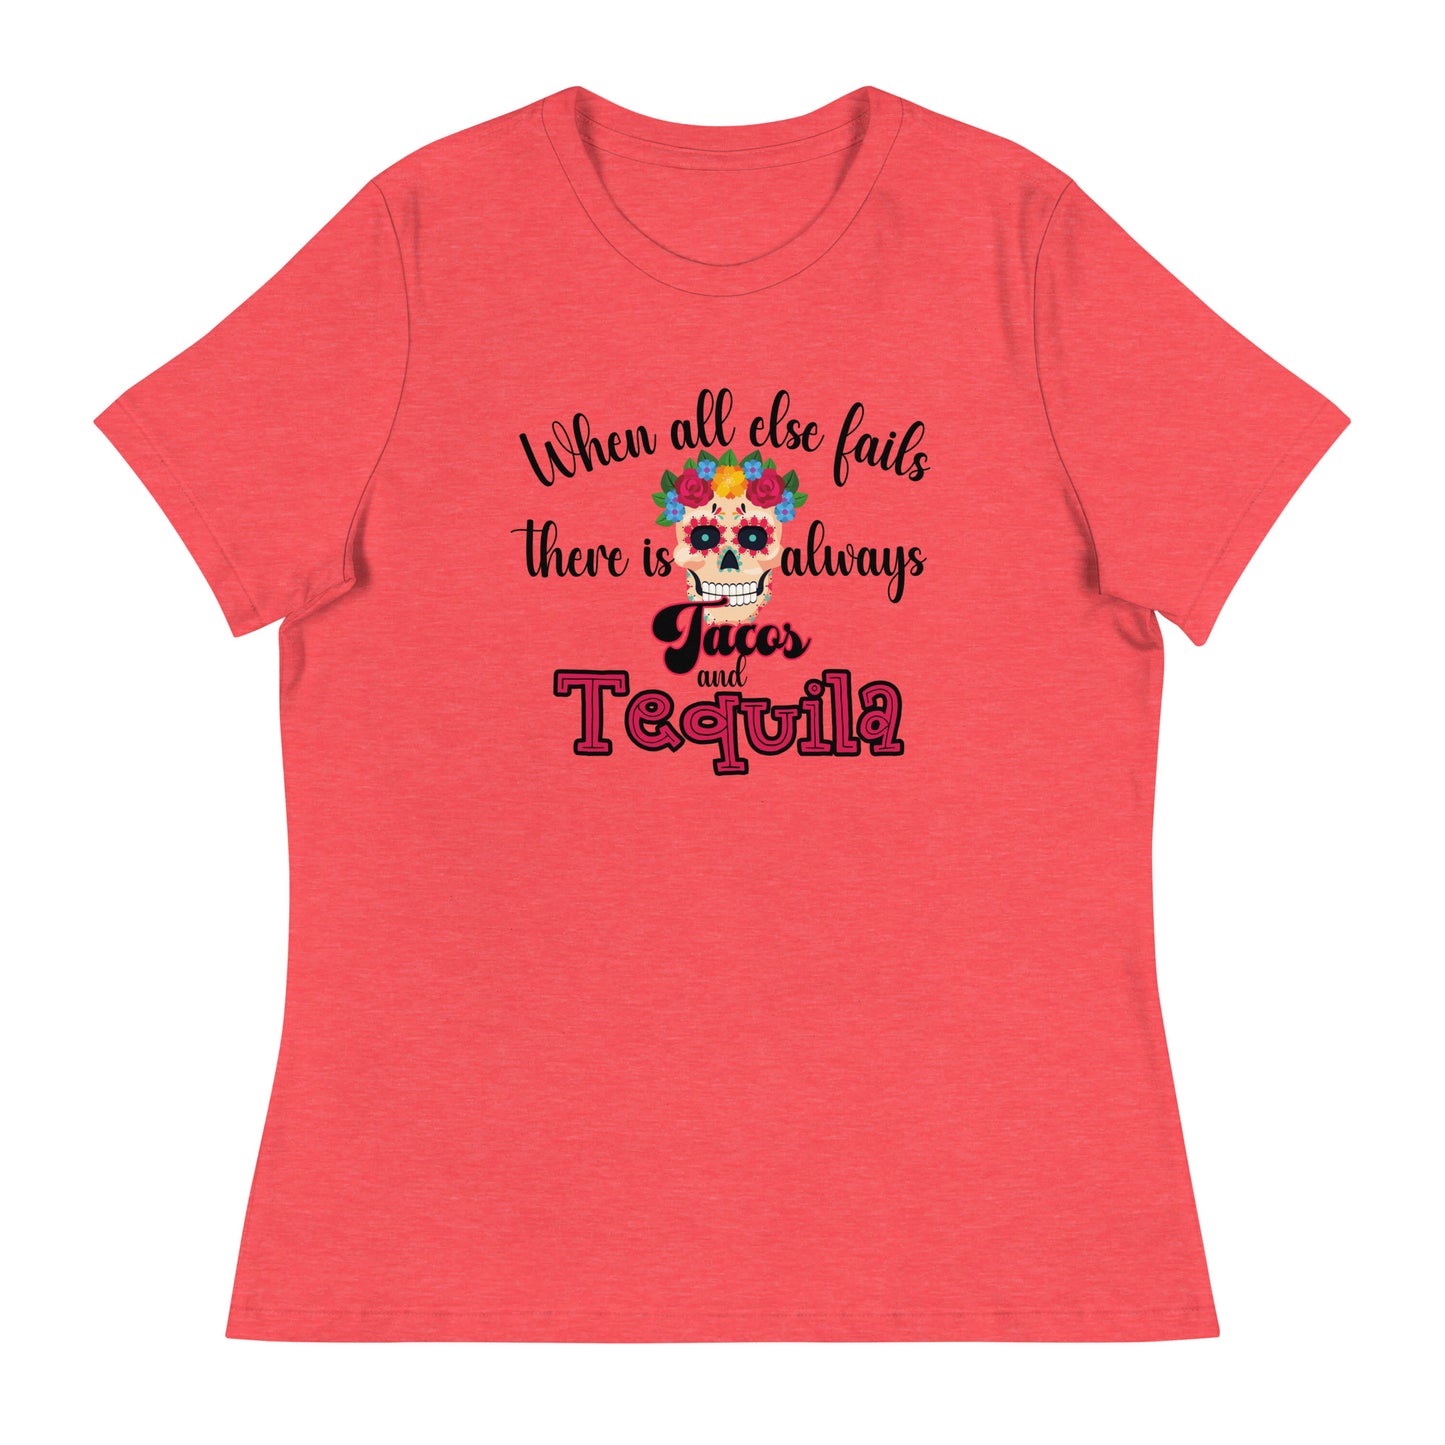 When all else fails there is always tacos and tequila Women's Tee Shirt